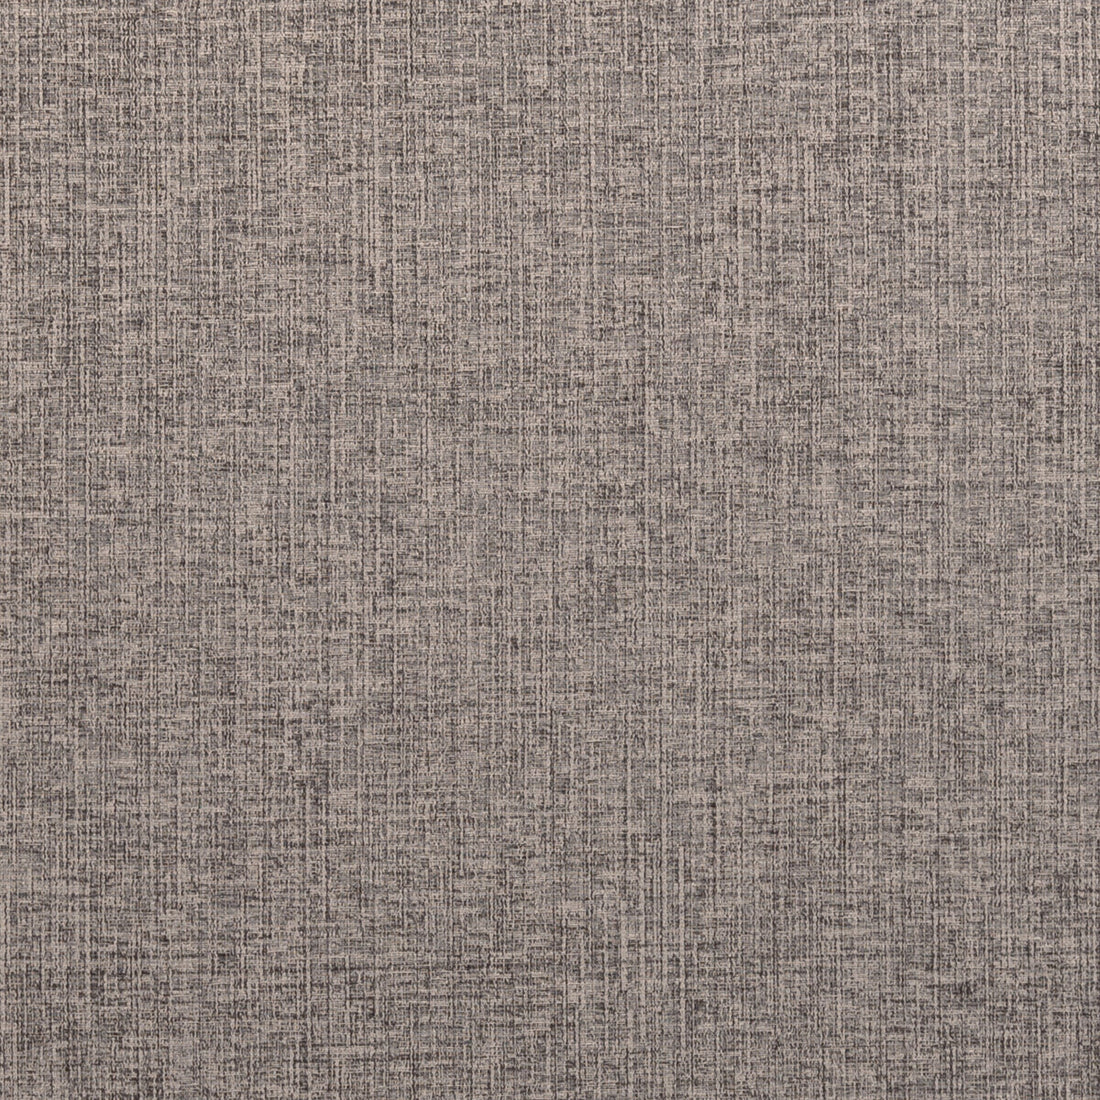 Karina fabric in grey color - pattern F0371/04.CAC.0 - by Clarke And Clarke in the Clarke &amp; Clarke Karina collection